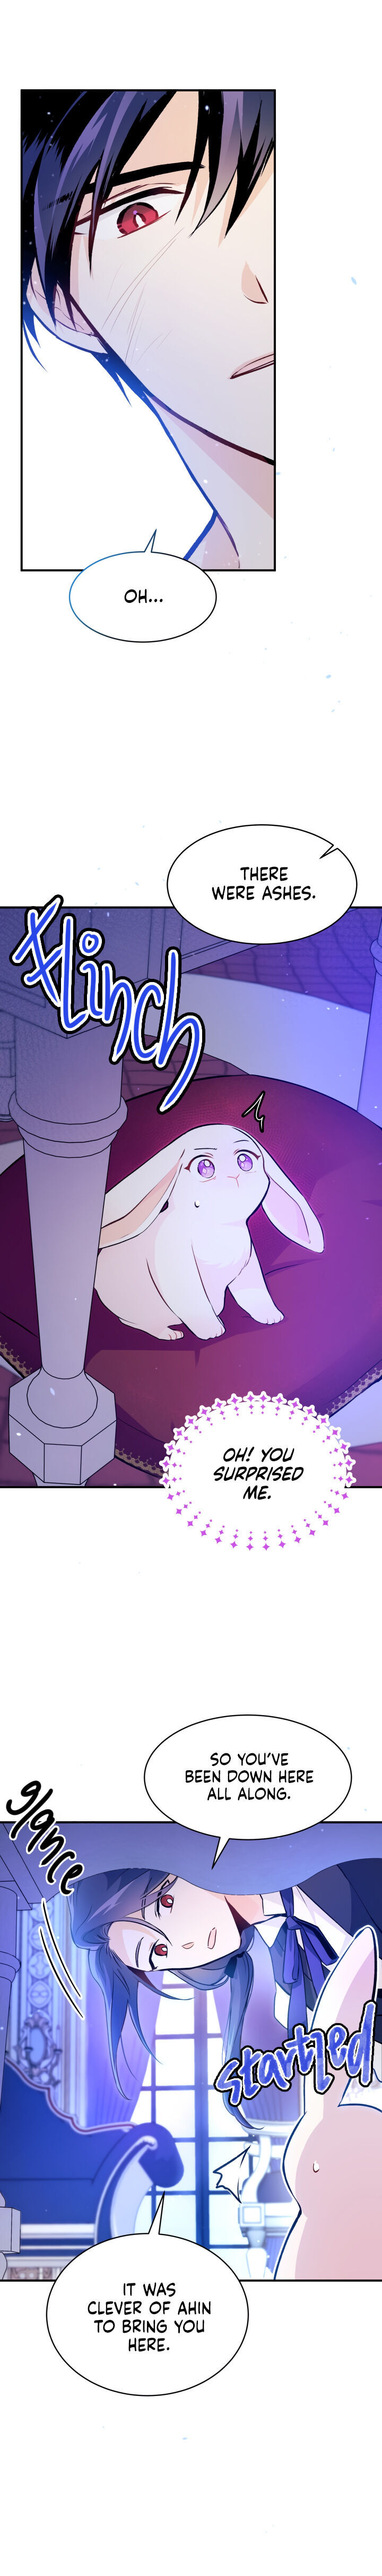 The Symbiotic Relationship Between A Rabbit and A Black Panther - Chapter 4 Page 10